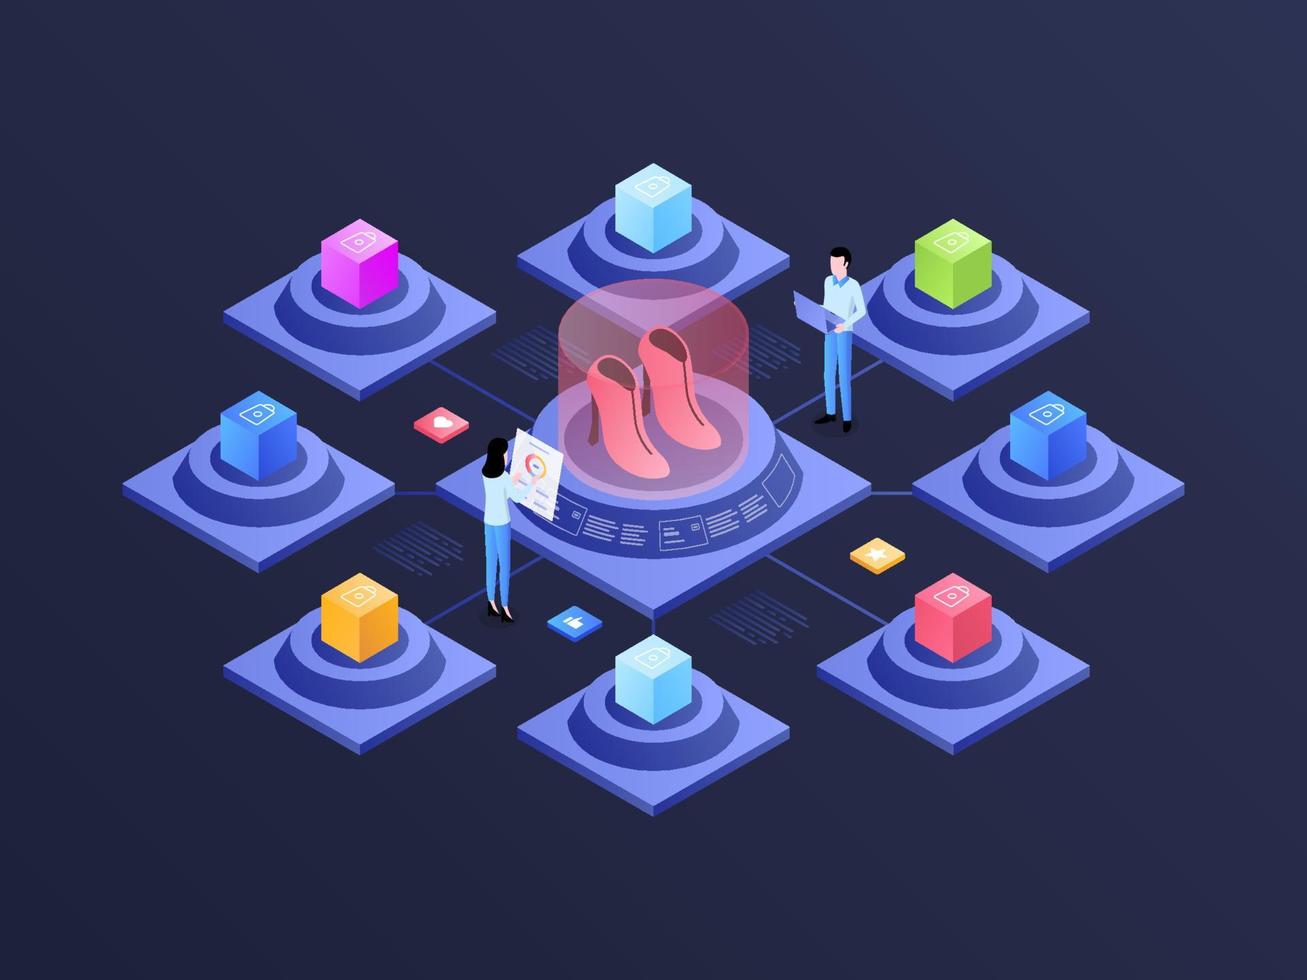 E-Commerce Omnichannel Isometric Illustration Dark Gradient. Suitable for Mobile App, Website, Banner, Diagrams, Infographics, and Other Graphic Assets. vector